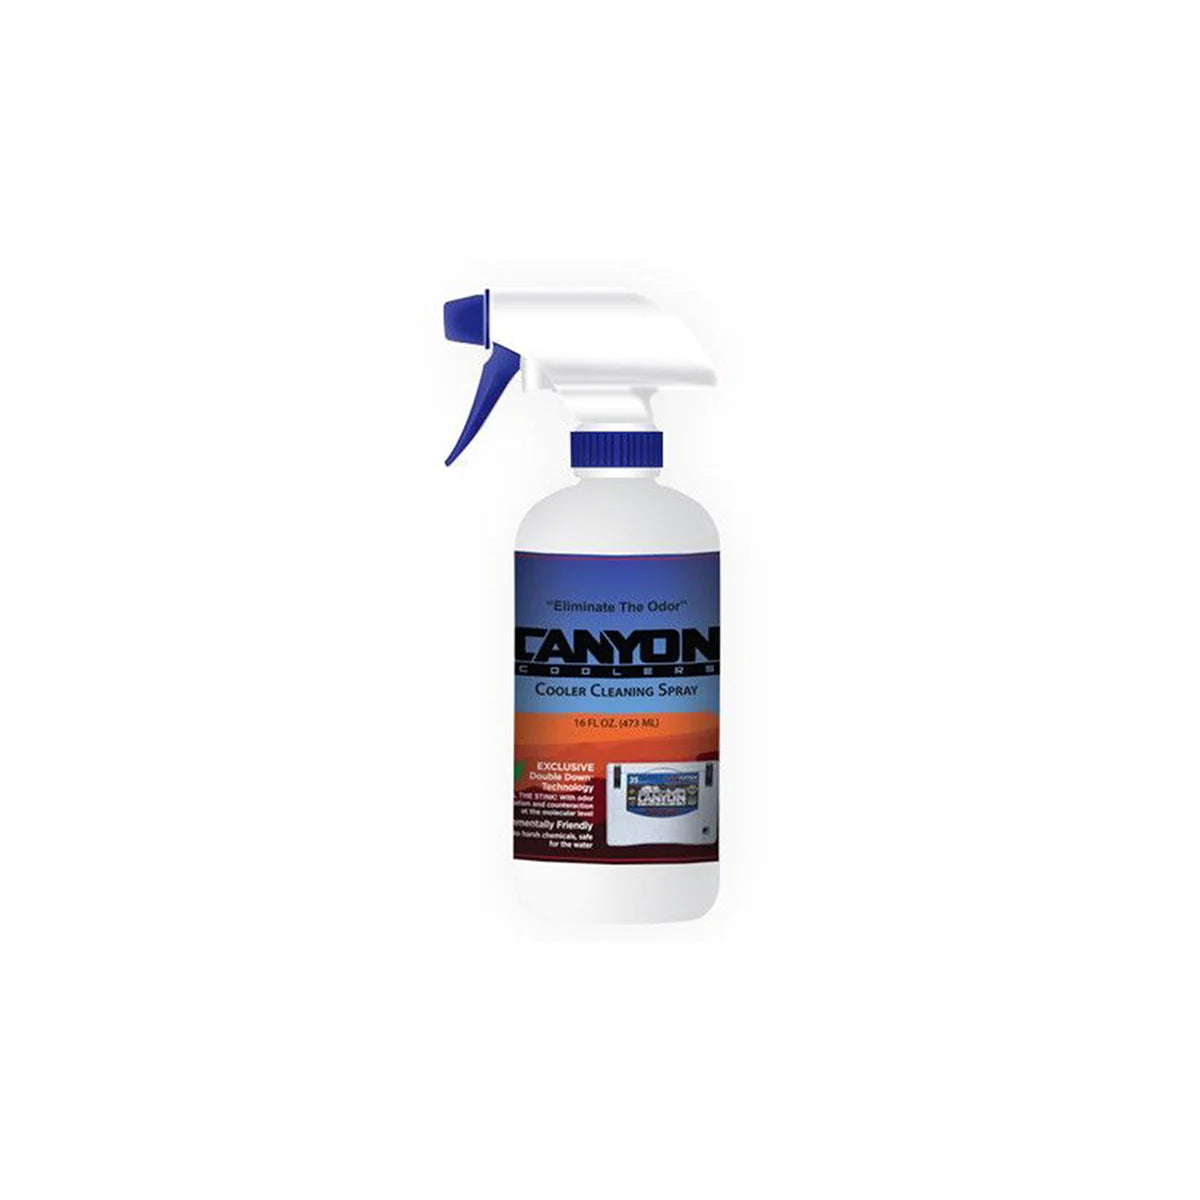 CANYON D-Funk Cooler Cleaner/Deodorizer